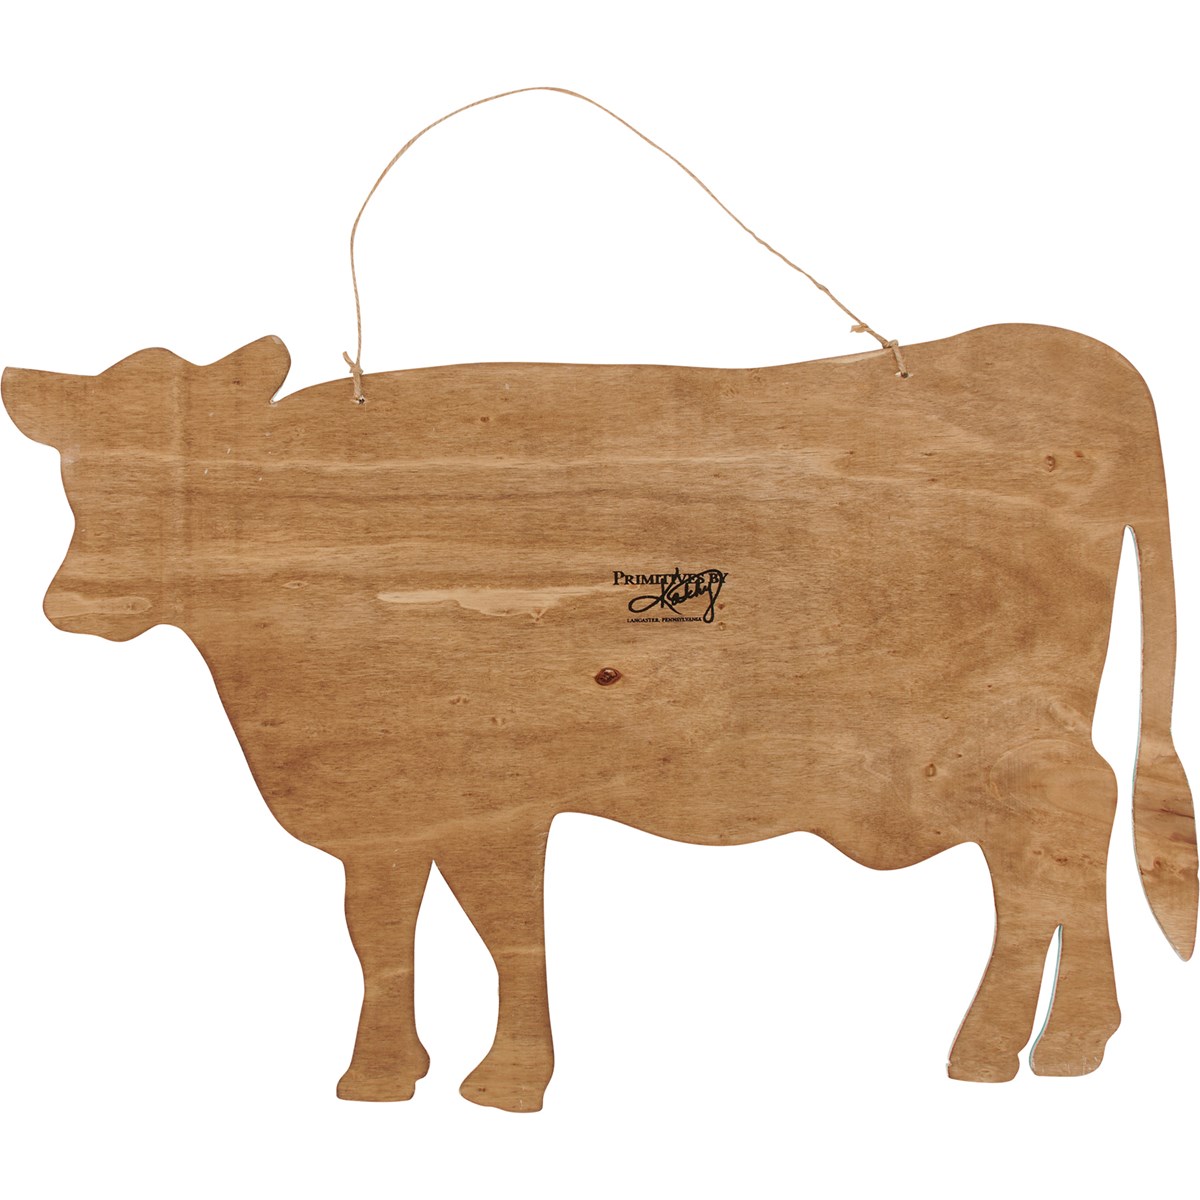 Floral Cow Wall Decor - Wood, Jute